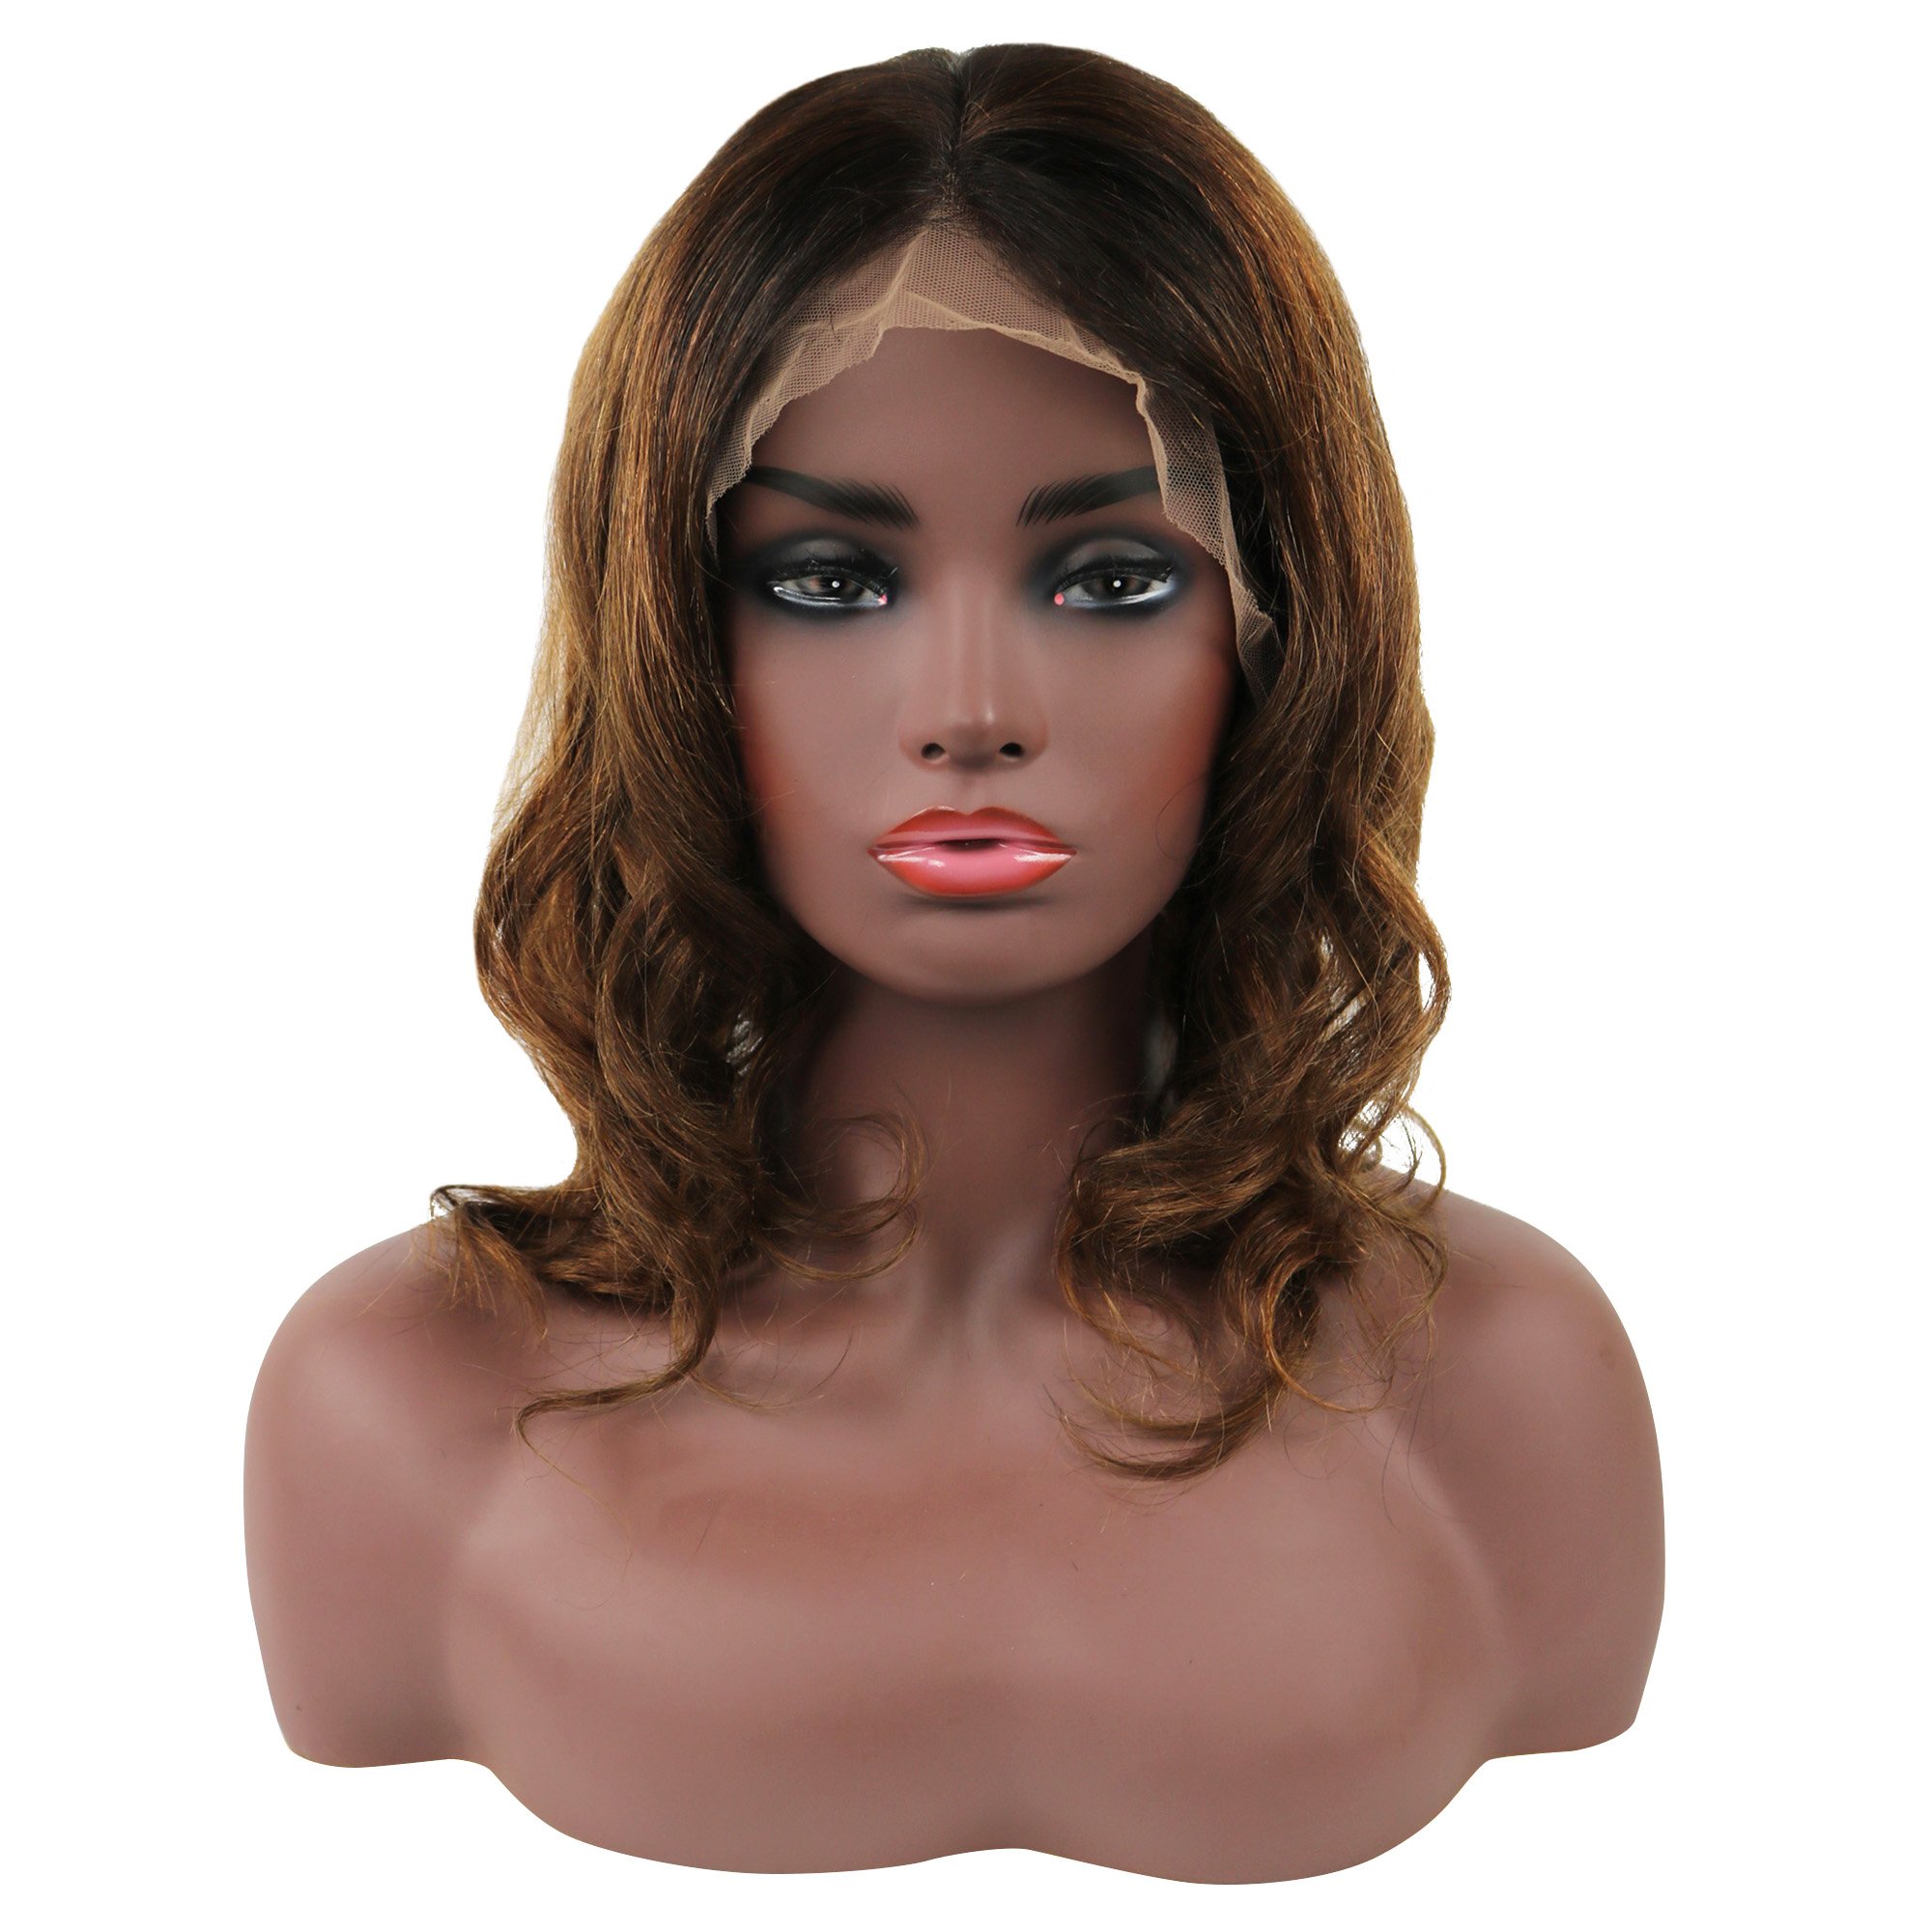 Ericdress Hot Mixed Color Women's Short Bob Hairstyles Wavy Human Hair Lace Front Wigs 12 Inches